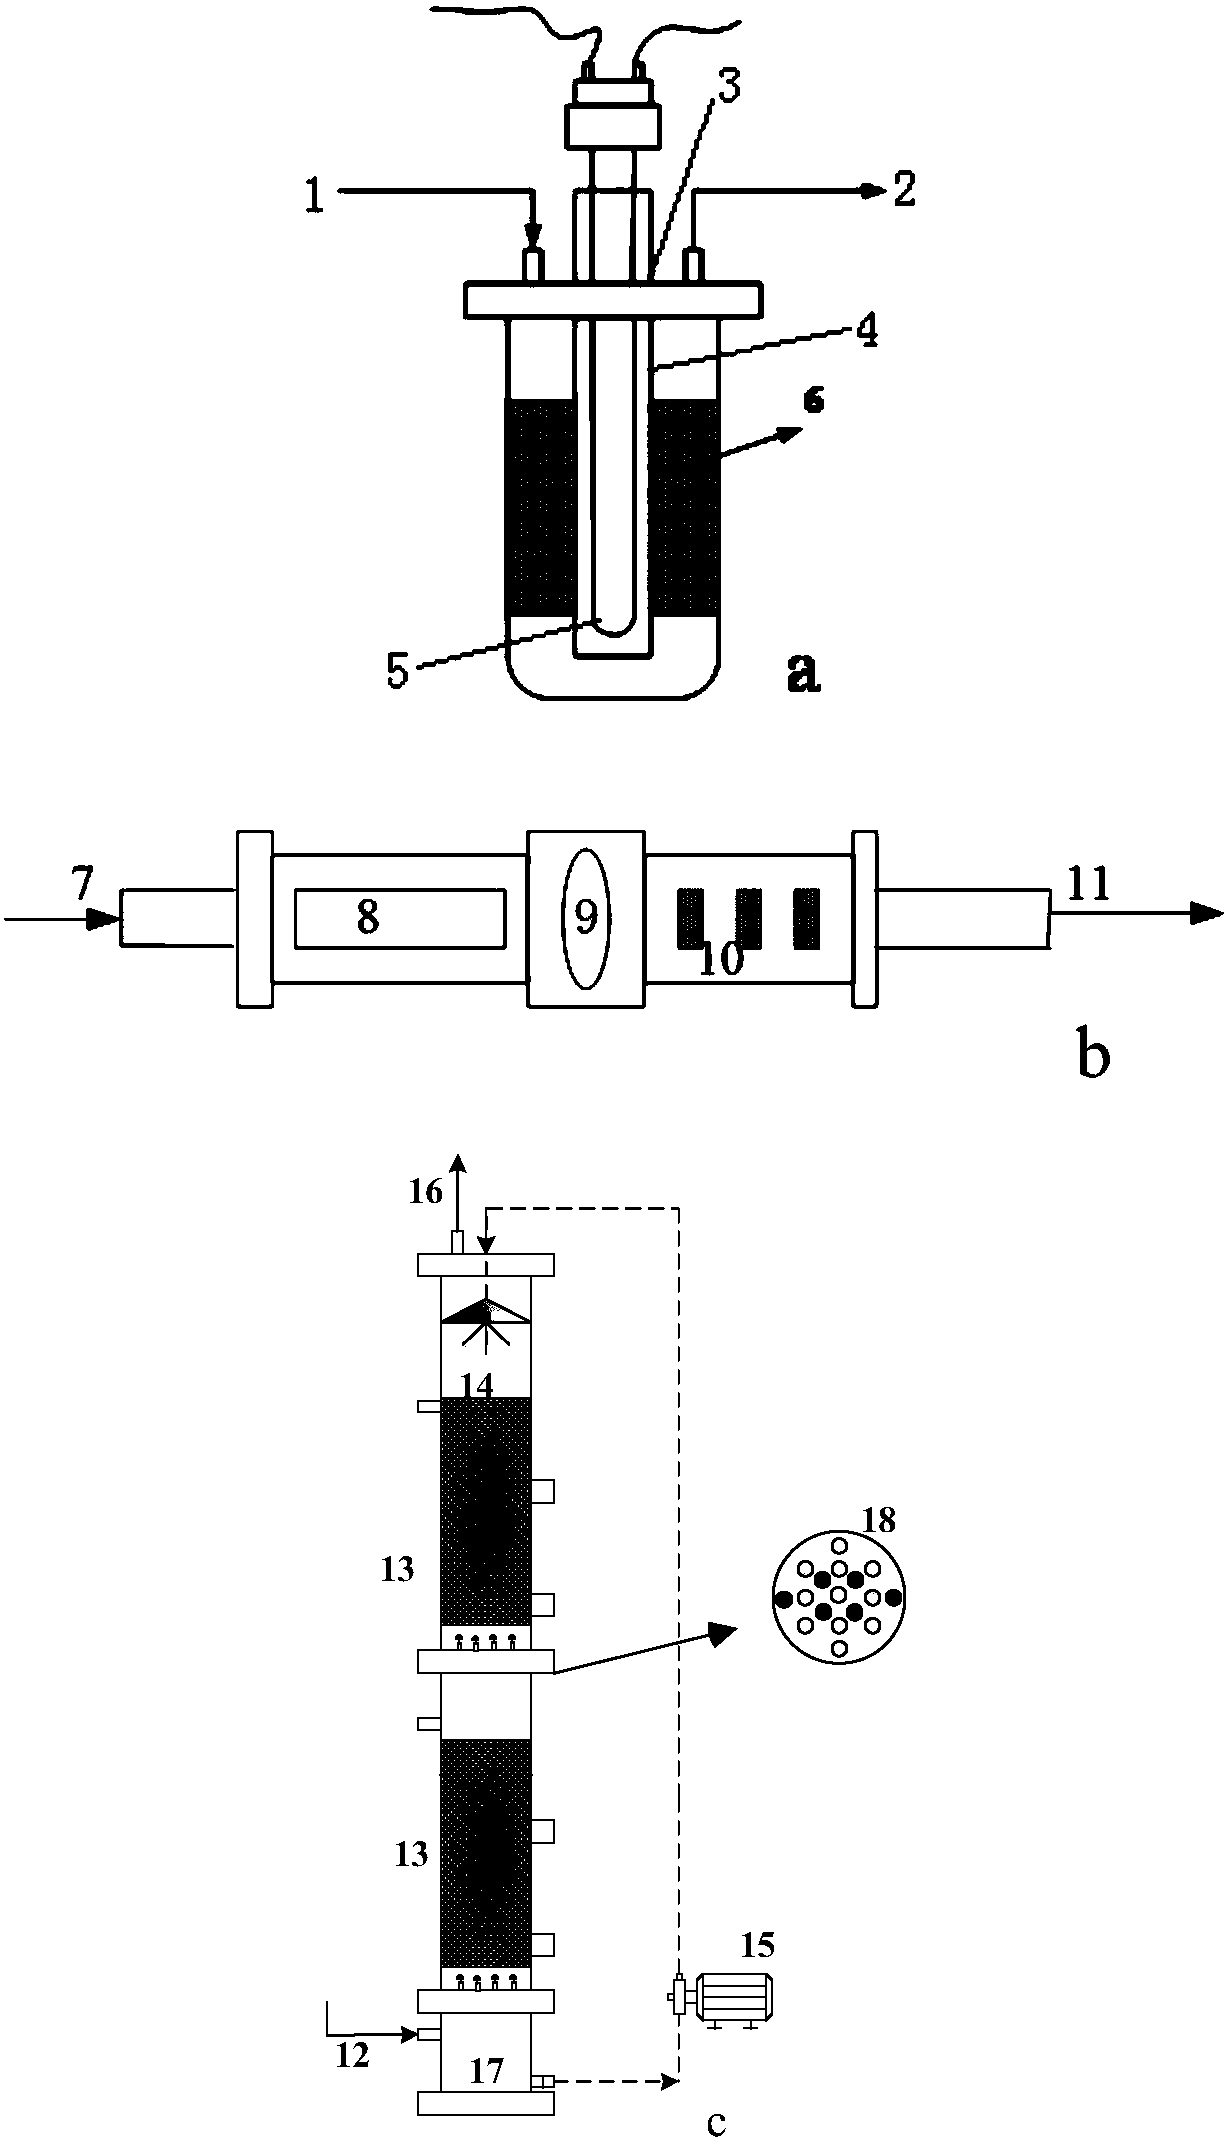 Advanced oxidation coupling biological cleaning system based on ozone regulation and application thereof